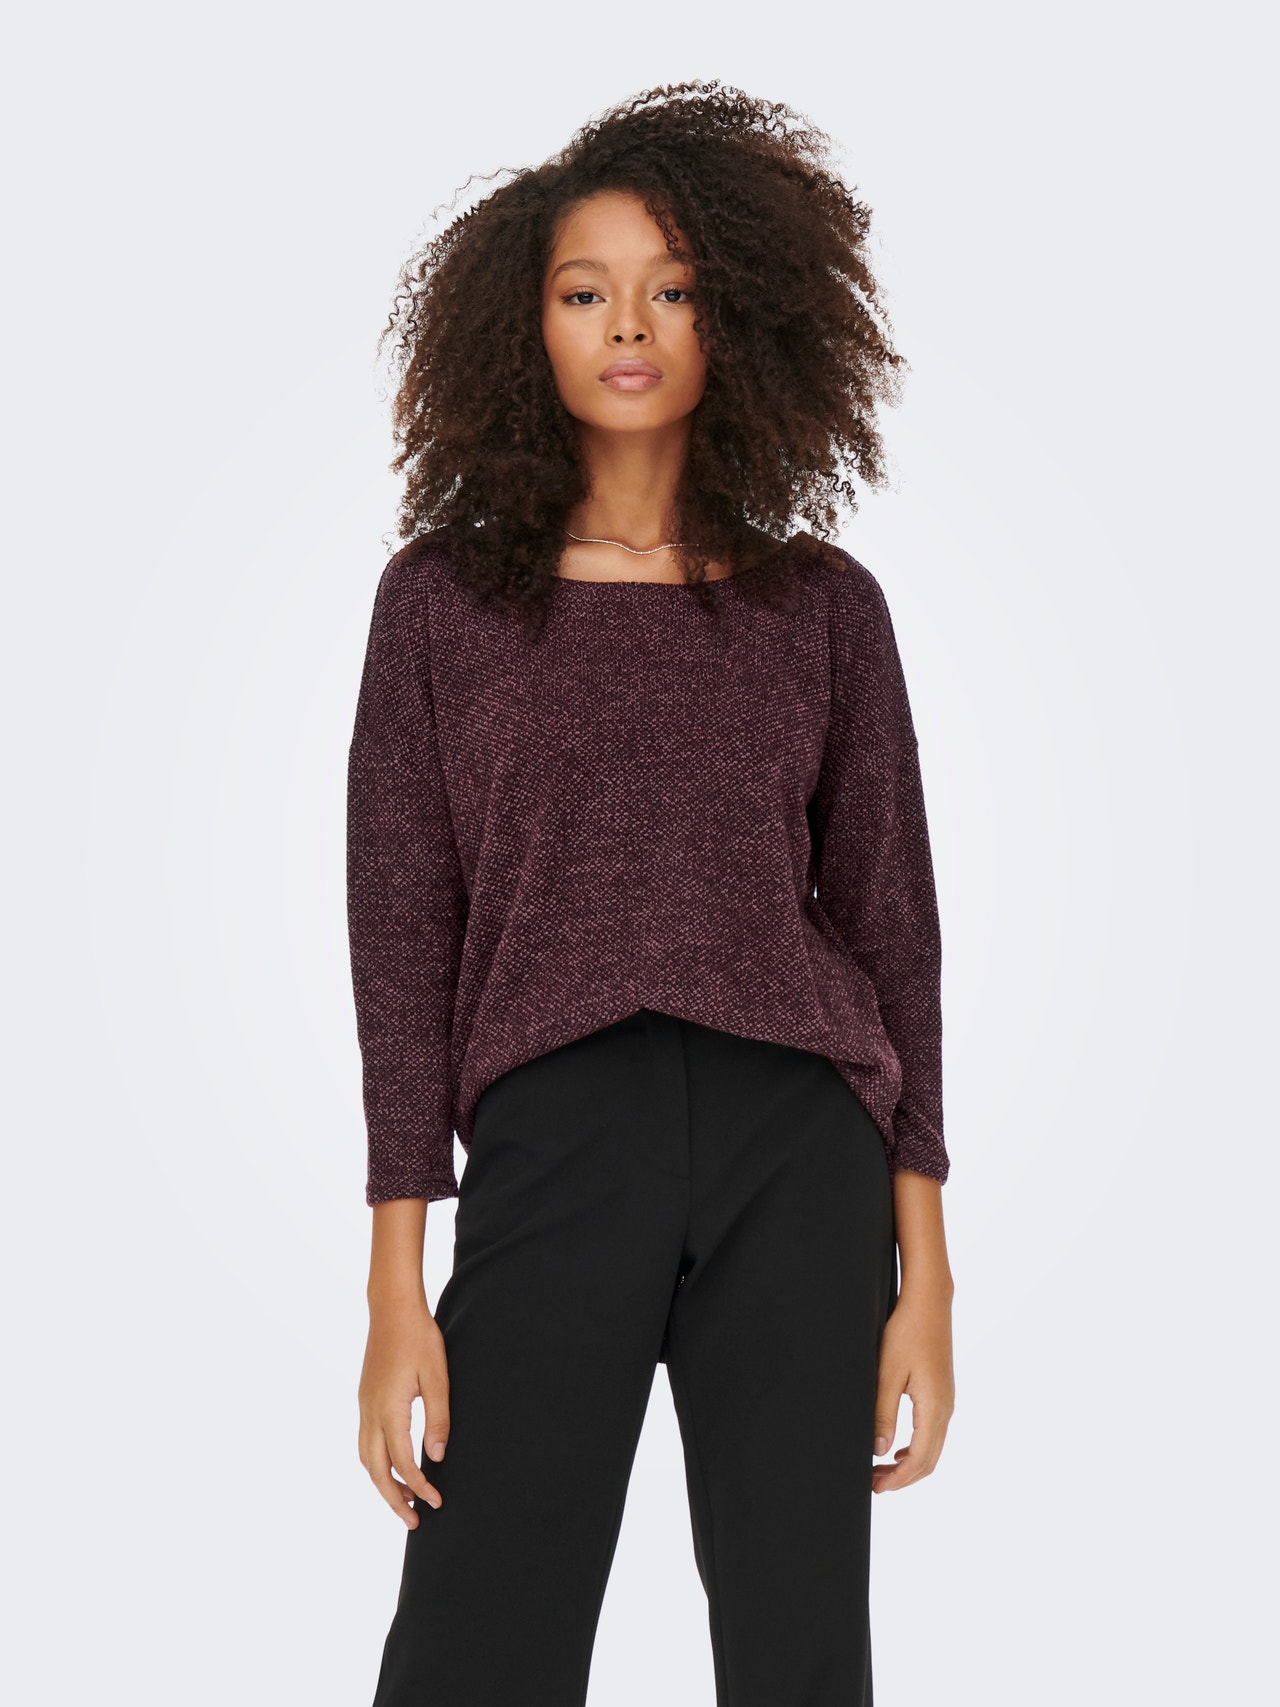 ONLY Oversize Top manches 3/4 -Winetasting - 15177776